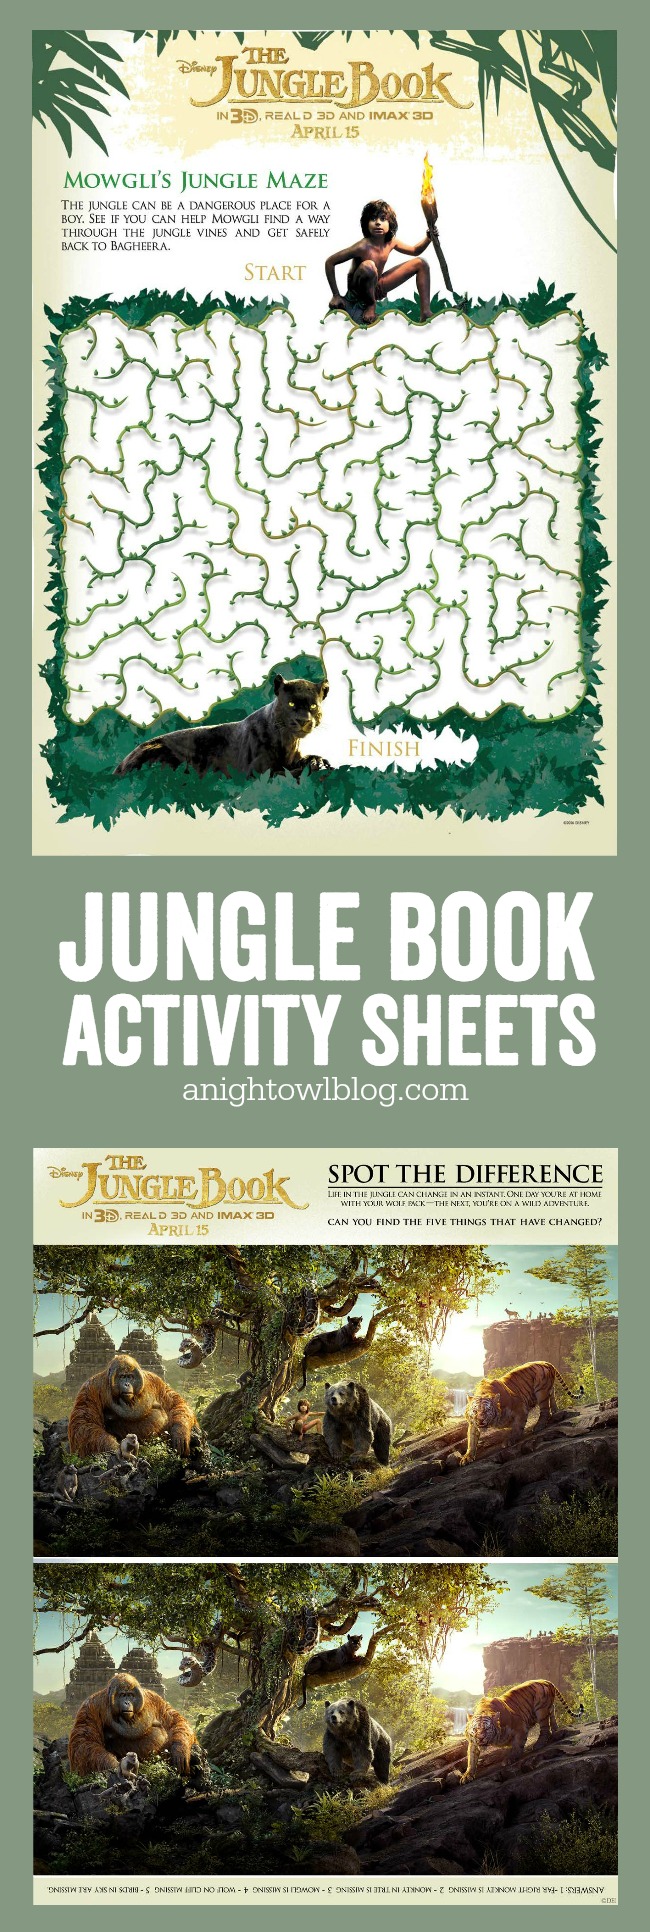 The Jungle Book Activity Sheets - download, print and enjoy today!